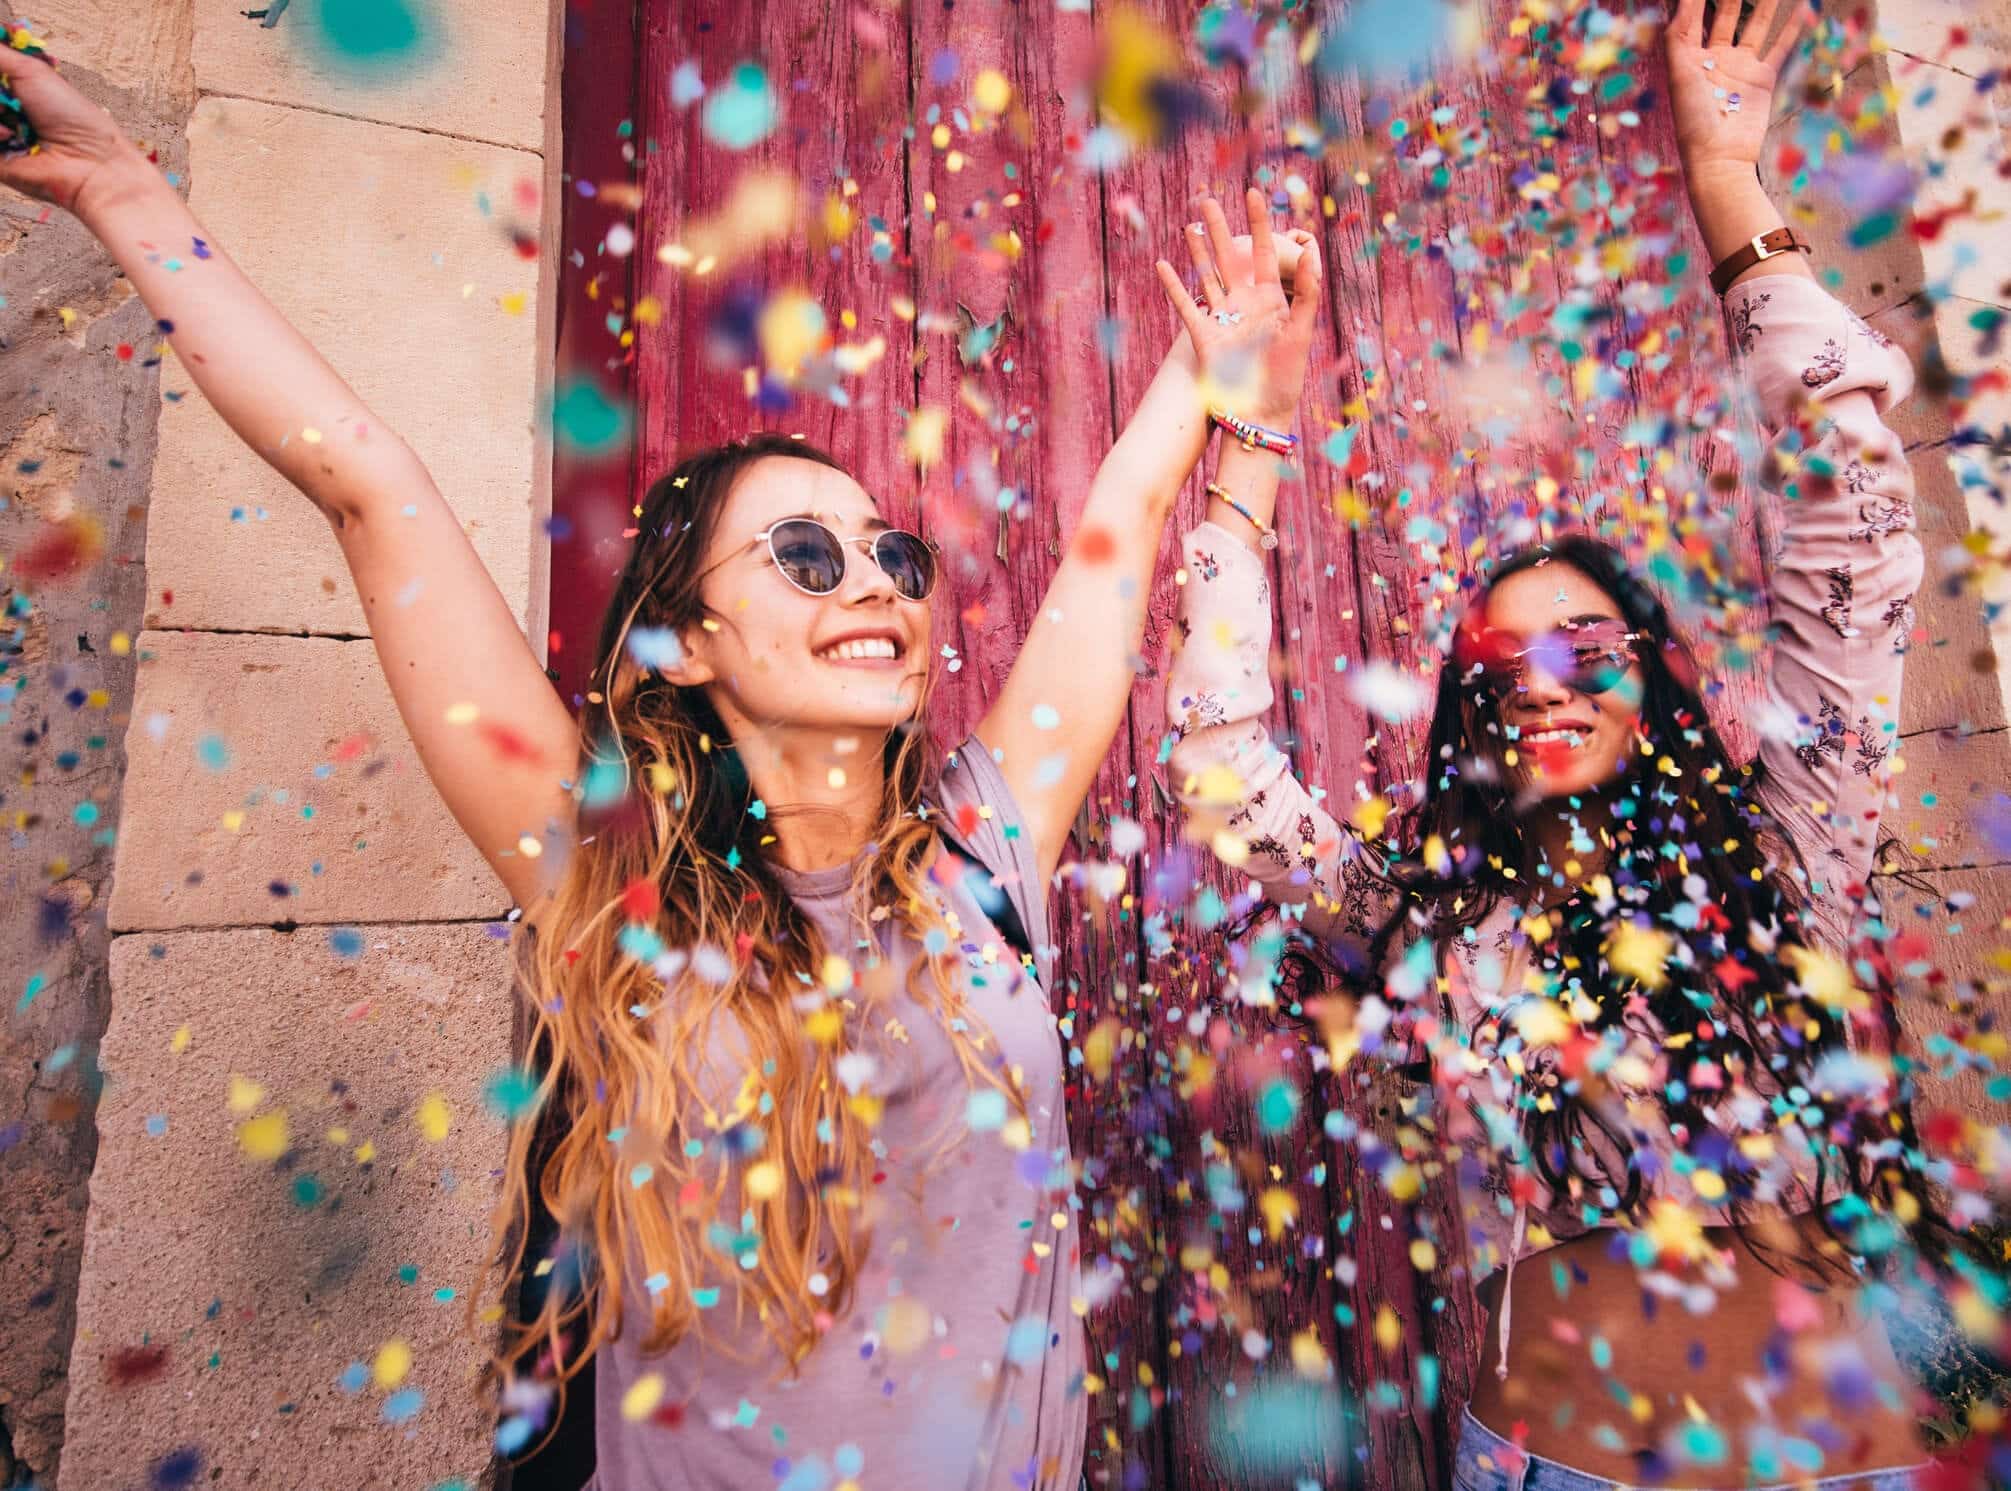 Two women are throwing confetti at each other.